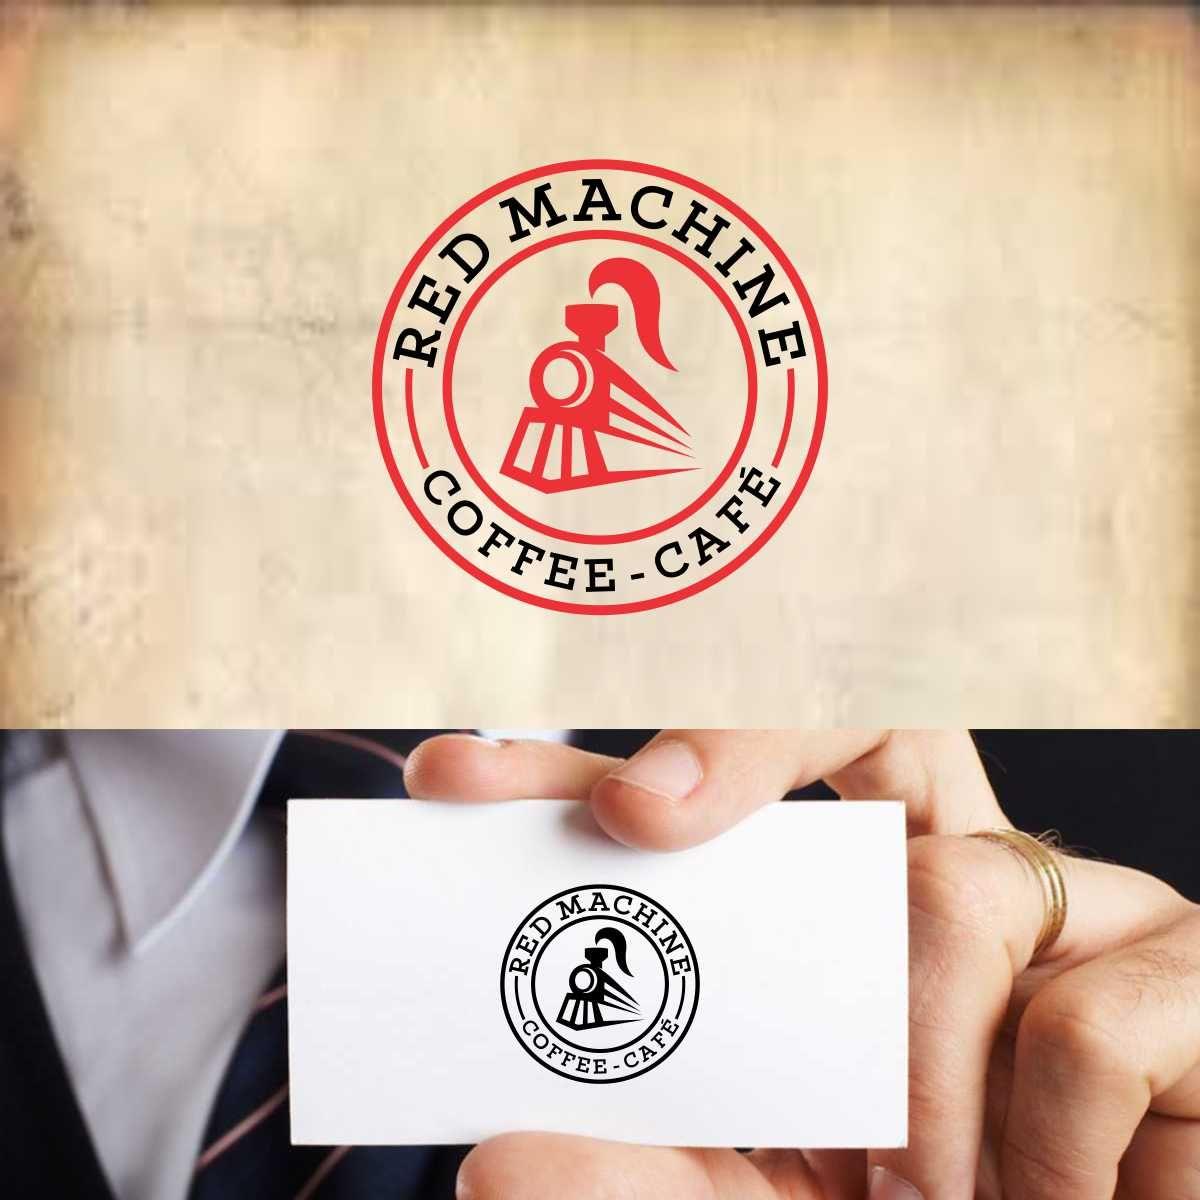 Red Coffee Shop Logo - Masculine, Serious, Coffee Shop Logo Design for Red Machine Coffee ...